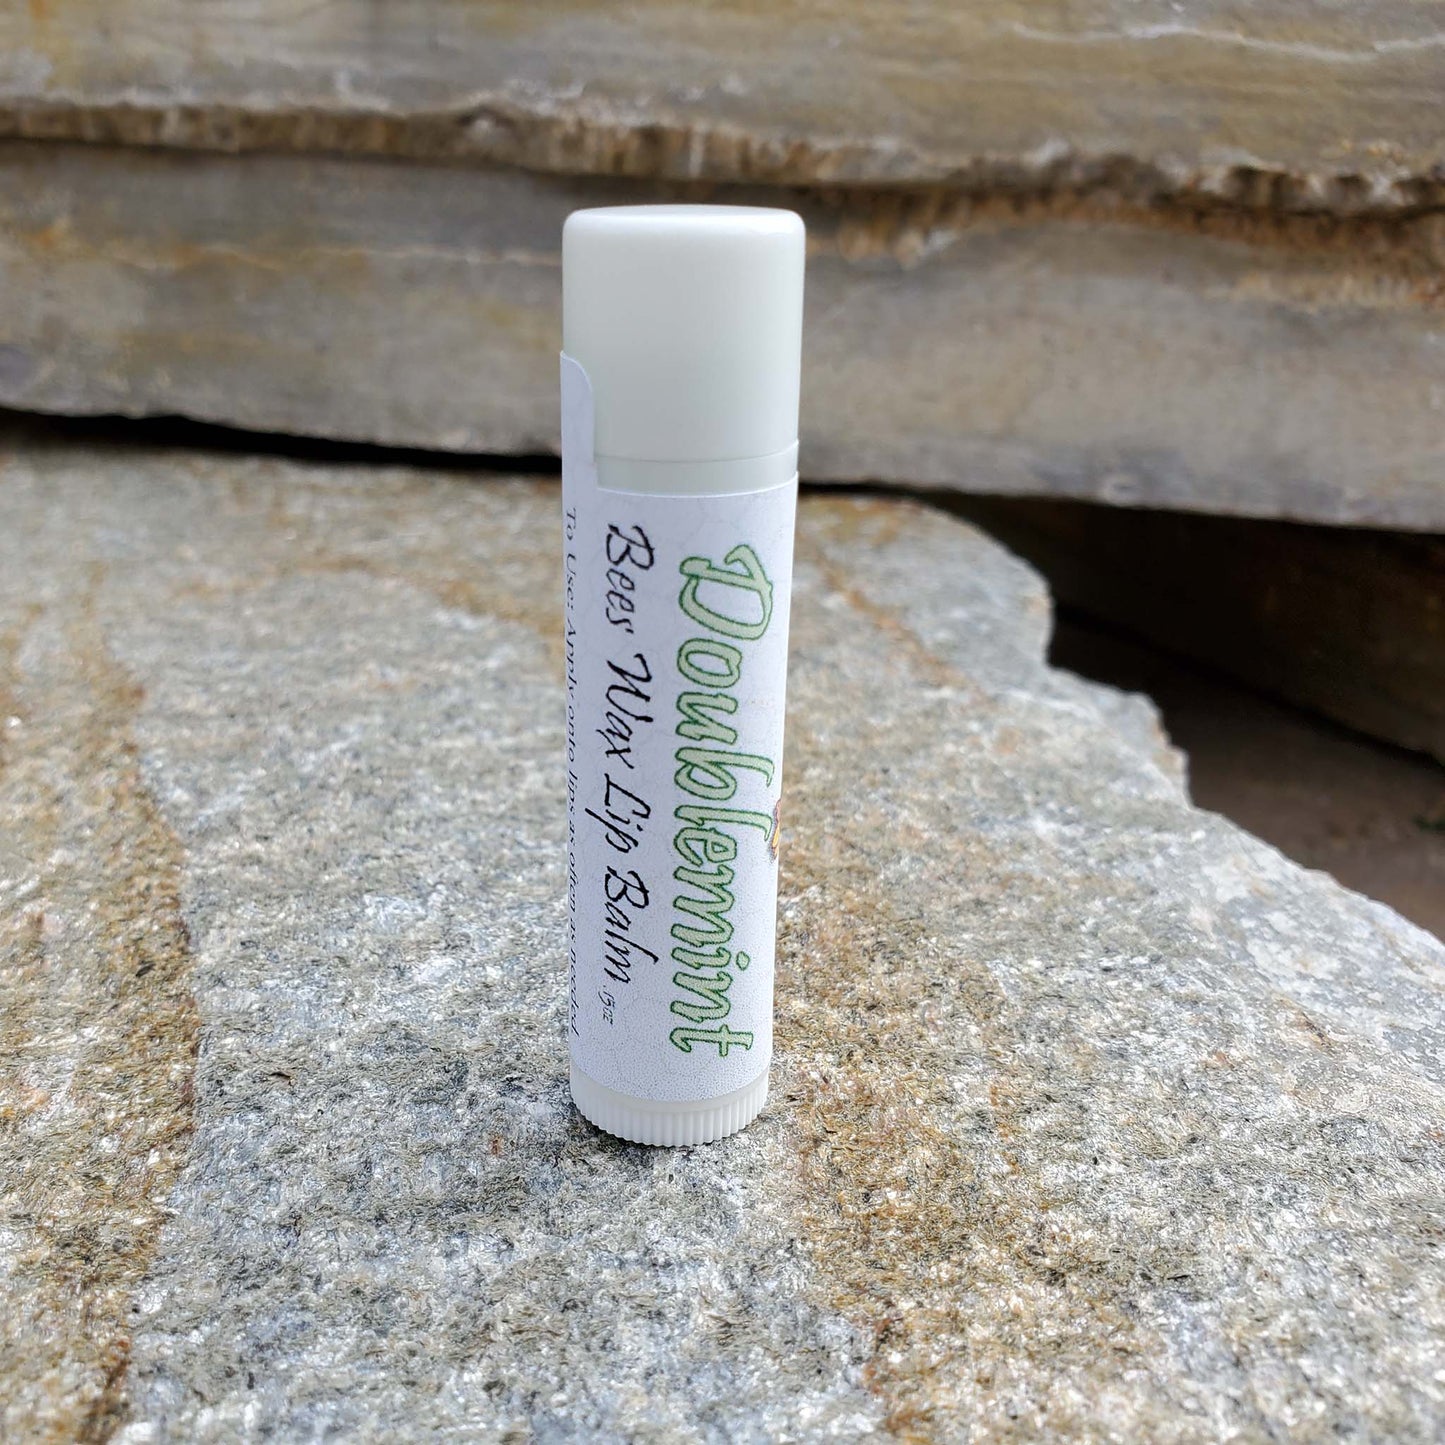 DoubleMint Bees Wax Lip Balm From Bee Your Own Valentine